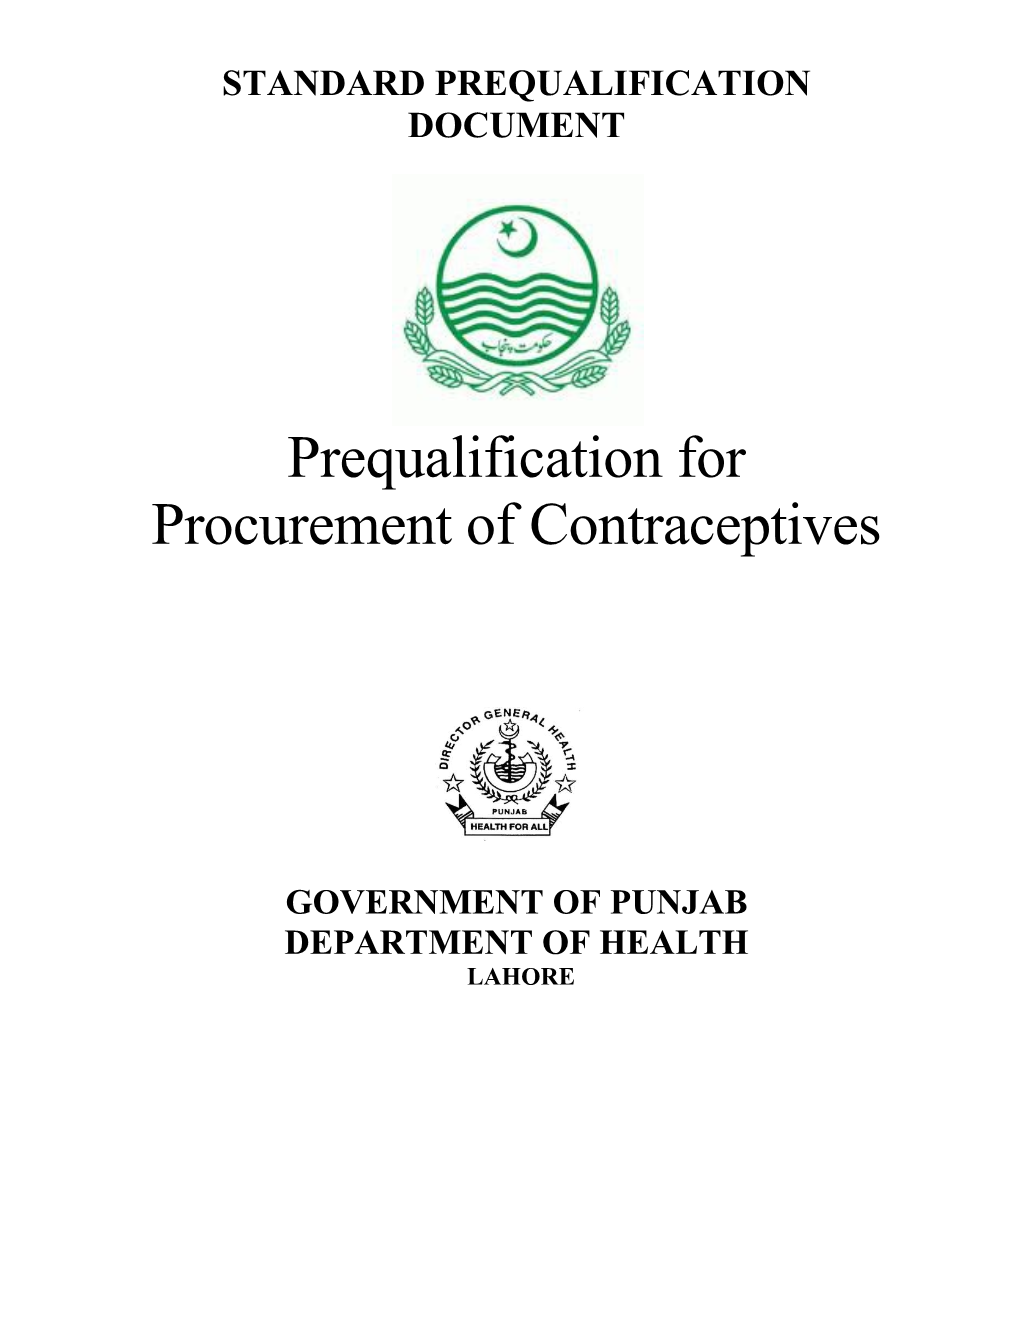 Prequalification Documents for Procurement of Contraceptives, Department of Health, Government